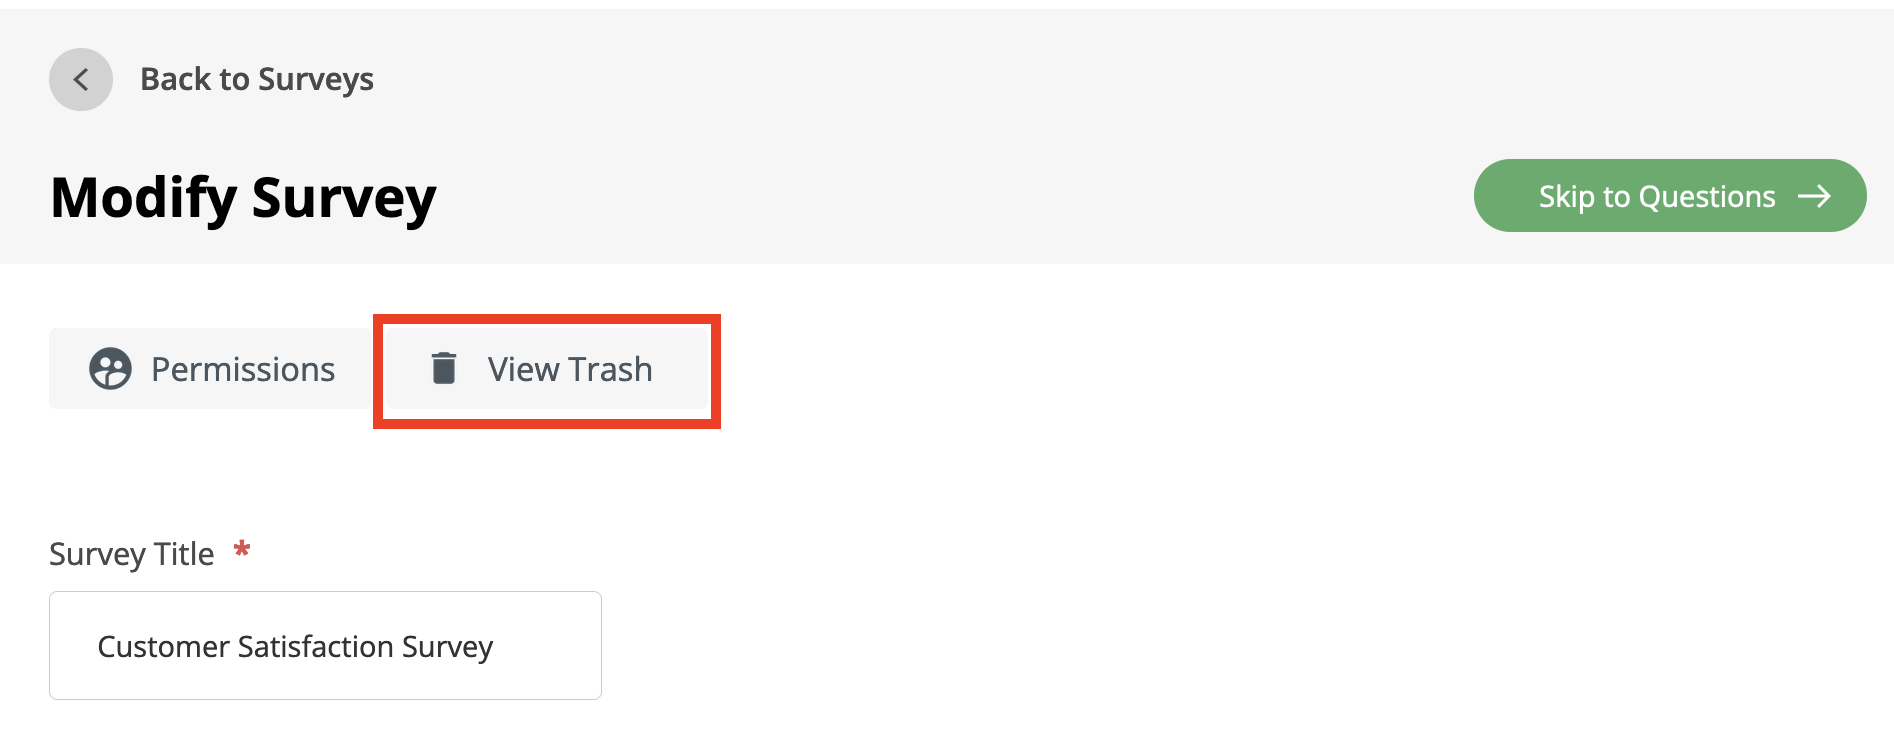 From survey details page, click on View Trash